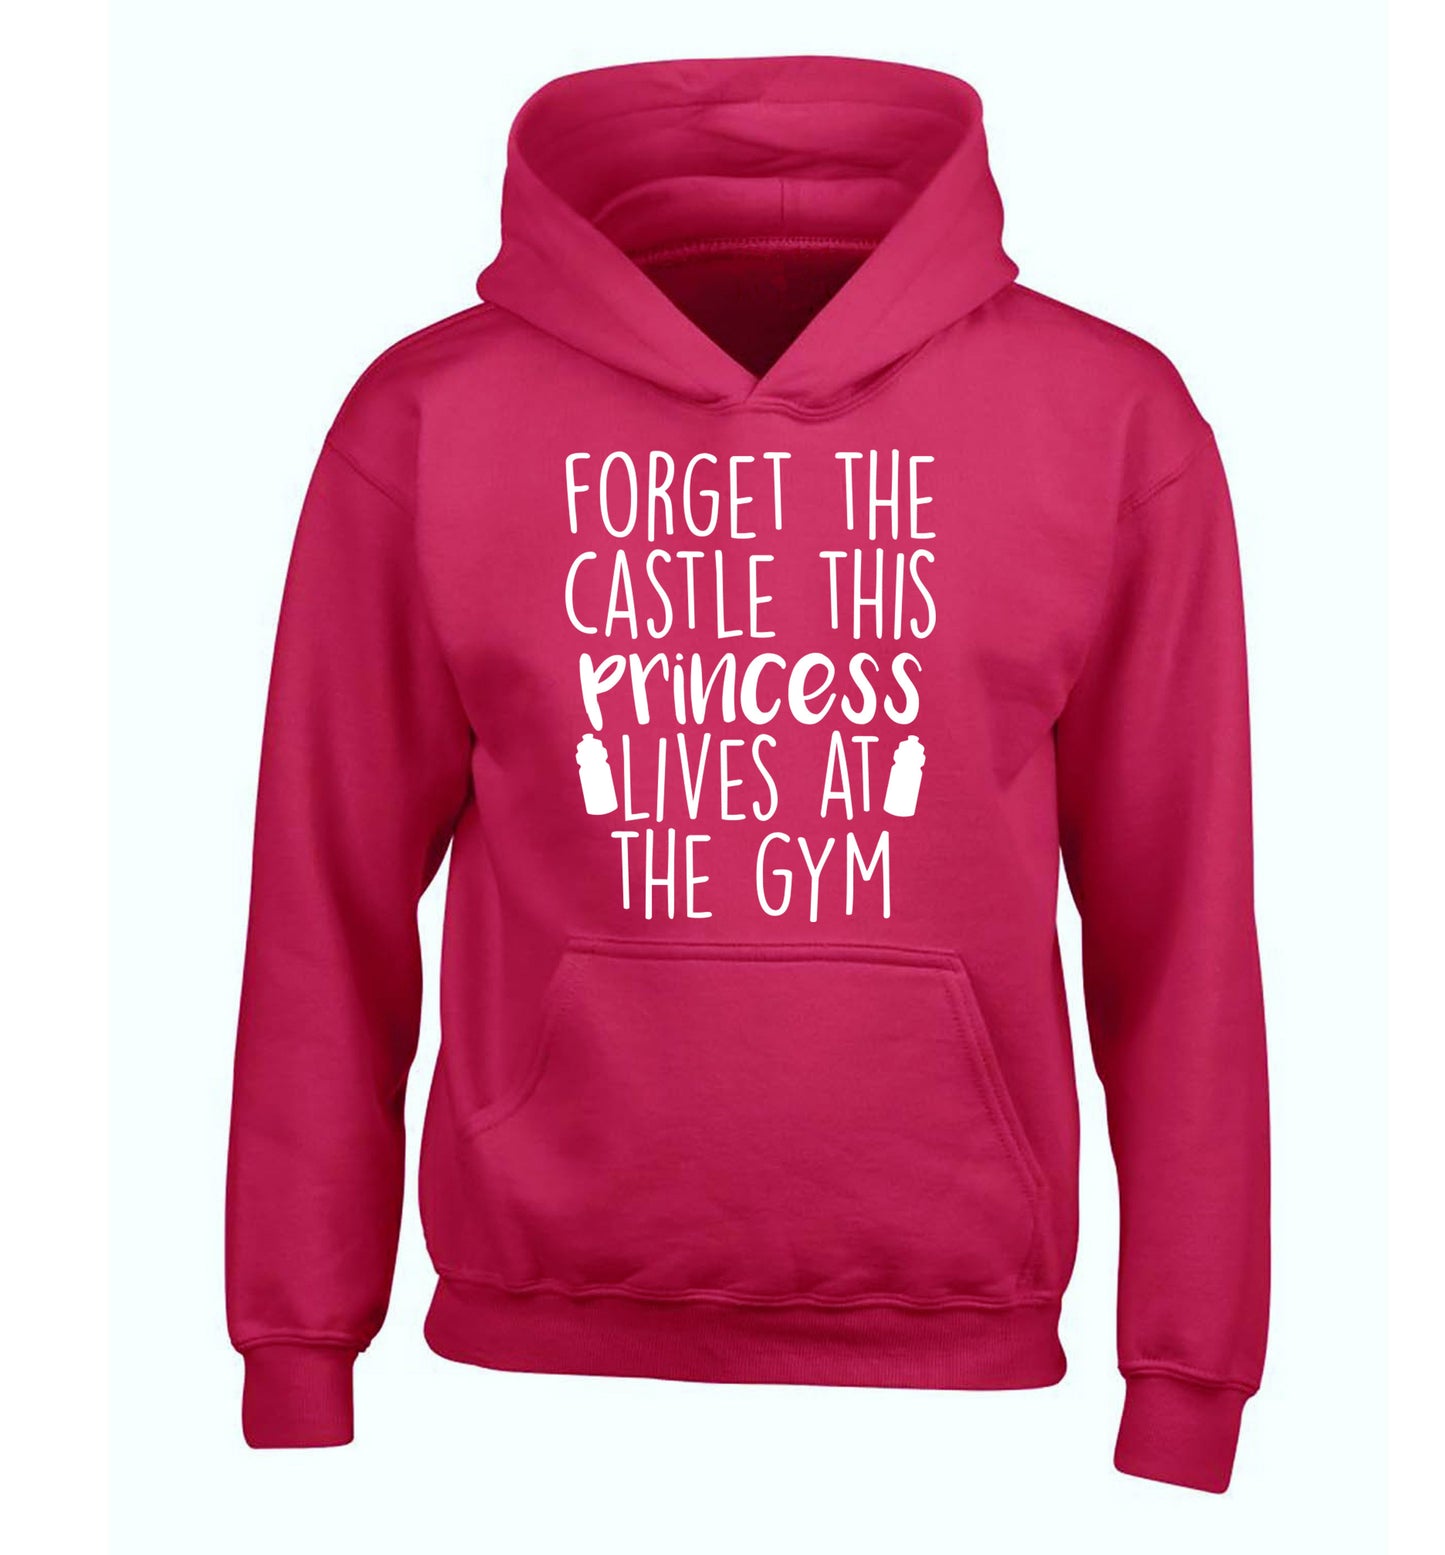 Forget the castle this princess lives at the gym children's pink hoodie 12-14 Years